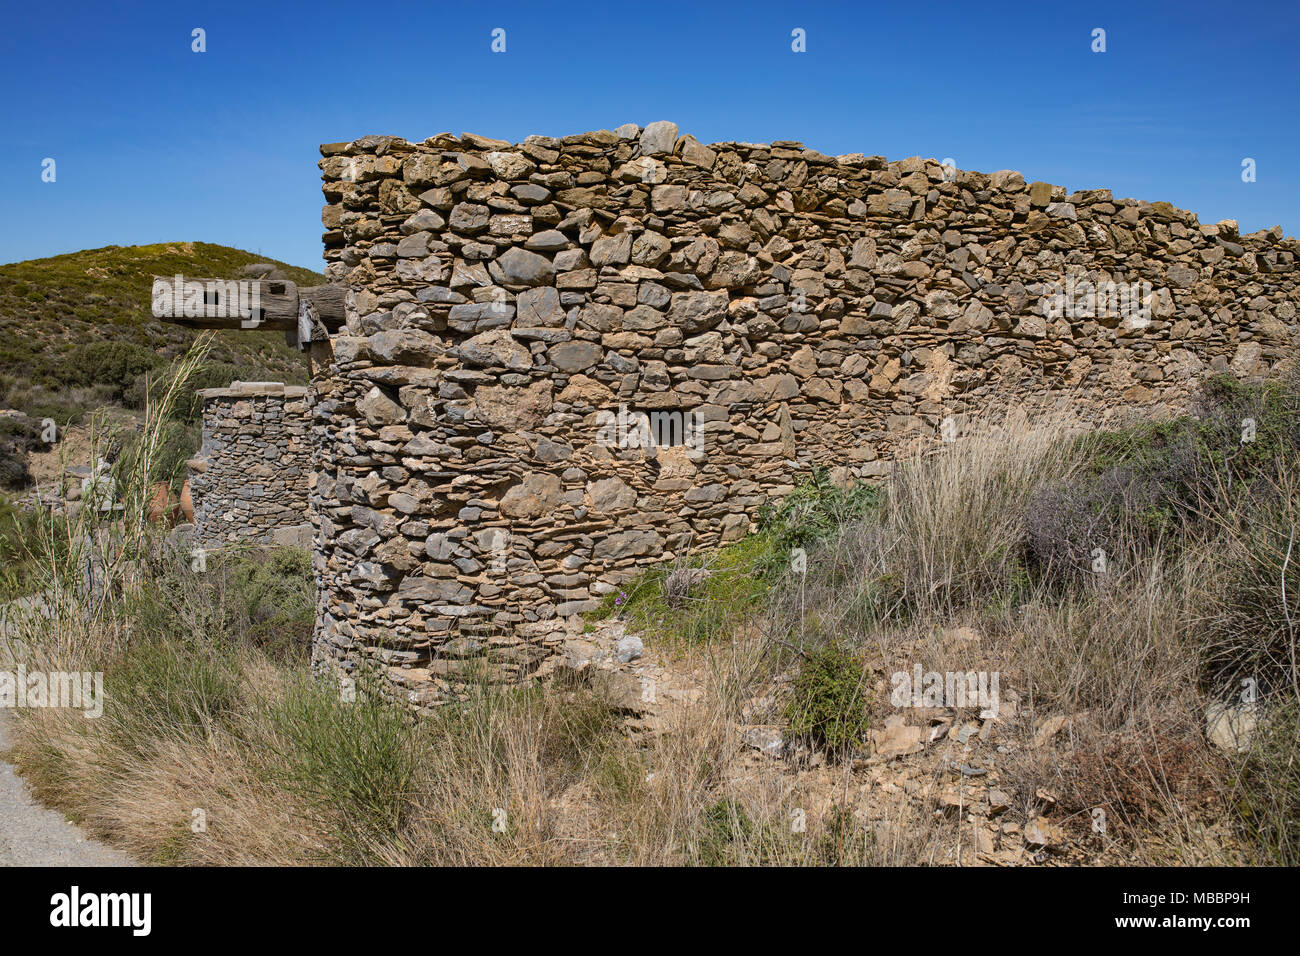 In traditional way rebuild house by archeological place, ruins in Chamezi. Remains after ancient minoan civilization. Aegean Bronze Age. Crete, Greece Stock Photo